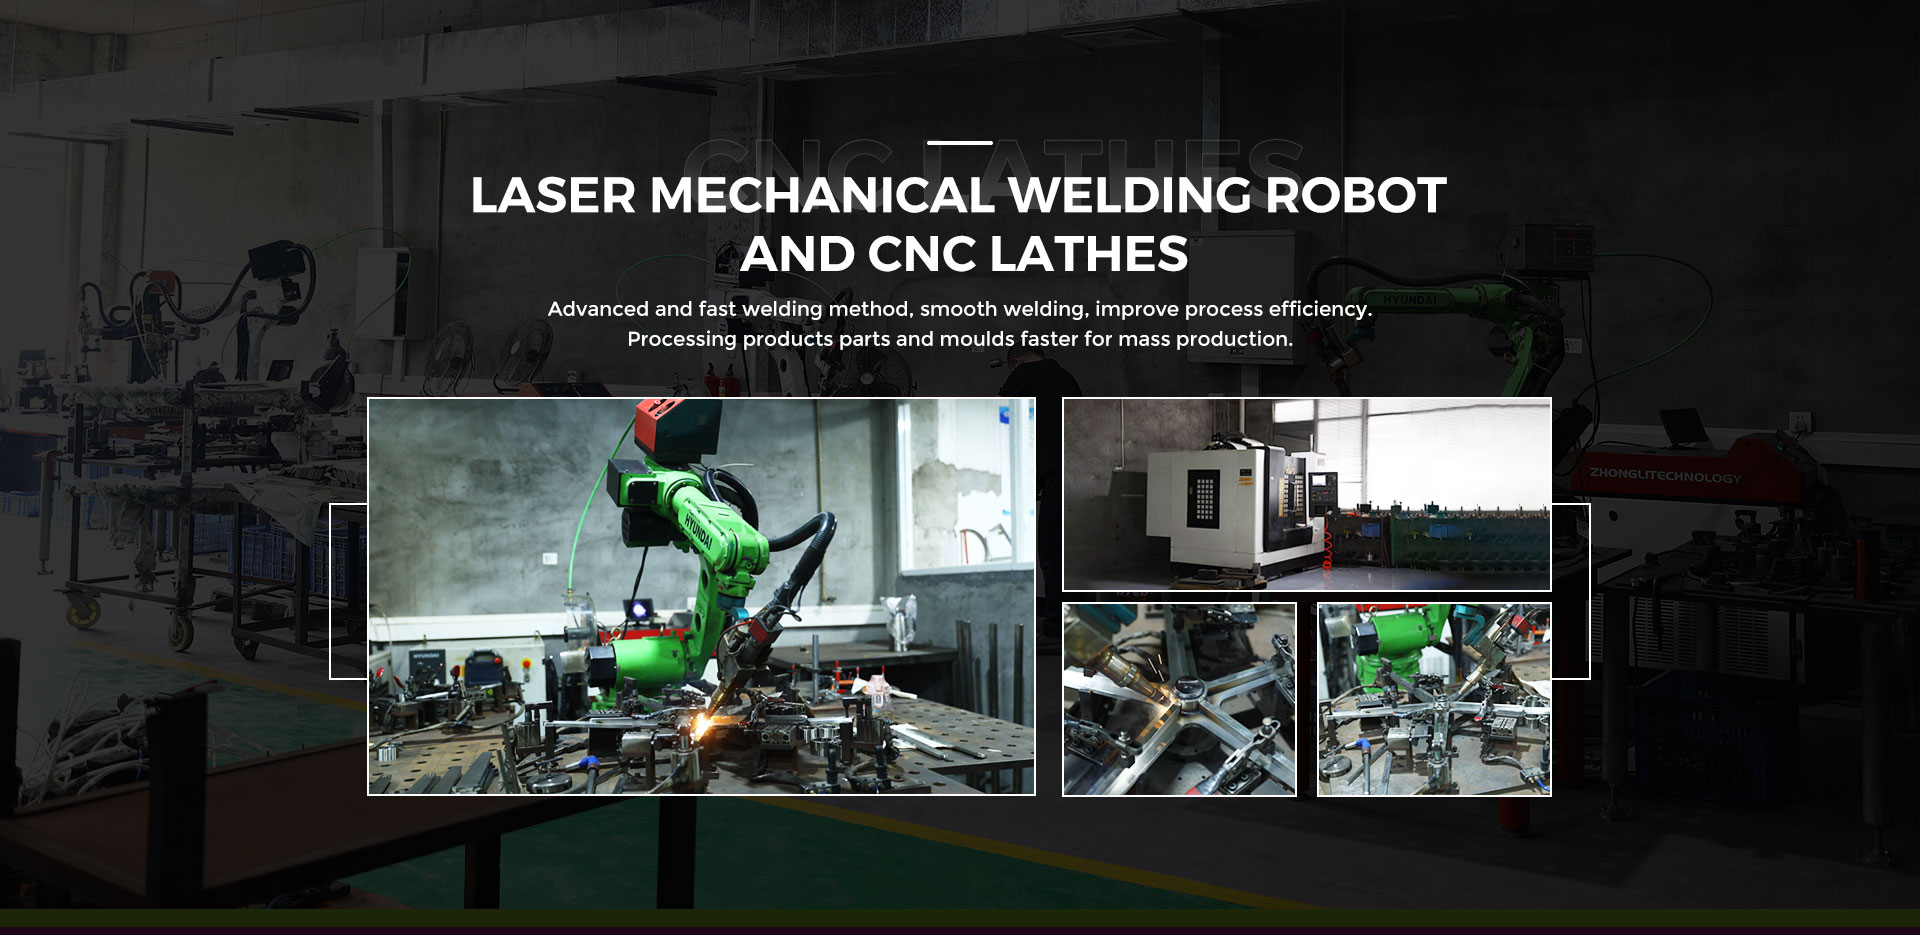 Laser mechanical welding robot and cnc lathes